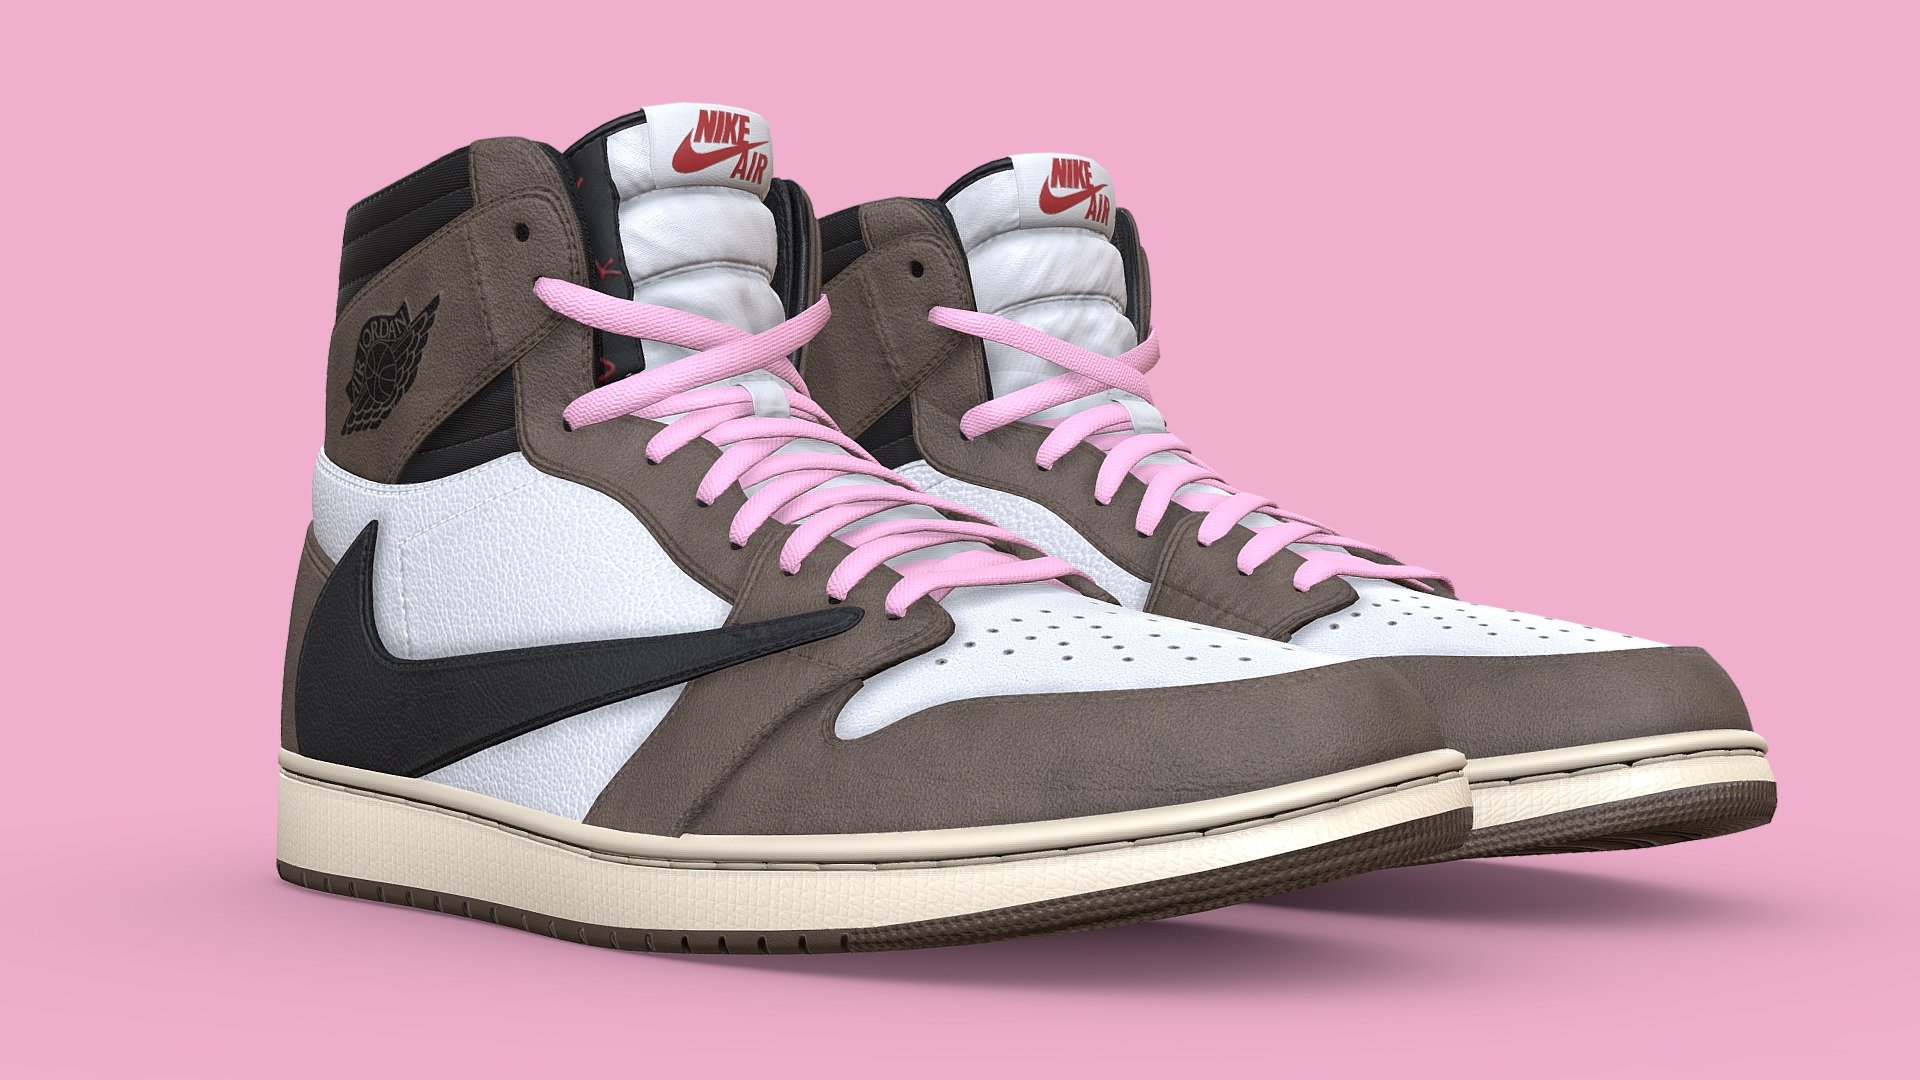 Game Ready, optimized version of my Travis Scott Mocha Jordan 1 shoe

This Low Poly version is included in the full version available here:
https://sketchfab.com/3d-models/jordan-1-travis-scott-mocha-game-ready-1caecac41d3a40b4ac49c98e42608e0f

This version features an optimized mesh. High Poly detail on the sole has been replaced with a baked normal map and the rest of the model has been streamlined to reduce the polycount. 

The model uses just one texture set. Black, White, Red, and Brown coloured laces are included as seperate base color files in the additional files,

This version includes: 
Blender file with linked textures
Fbx 
Obj
Png texture files - Jordan 1 Travis Scott Mocha Game Ready - Buy Royalty Free 3D model by Joe-Wall (@joewall) 3d model